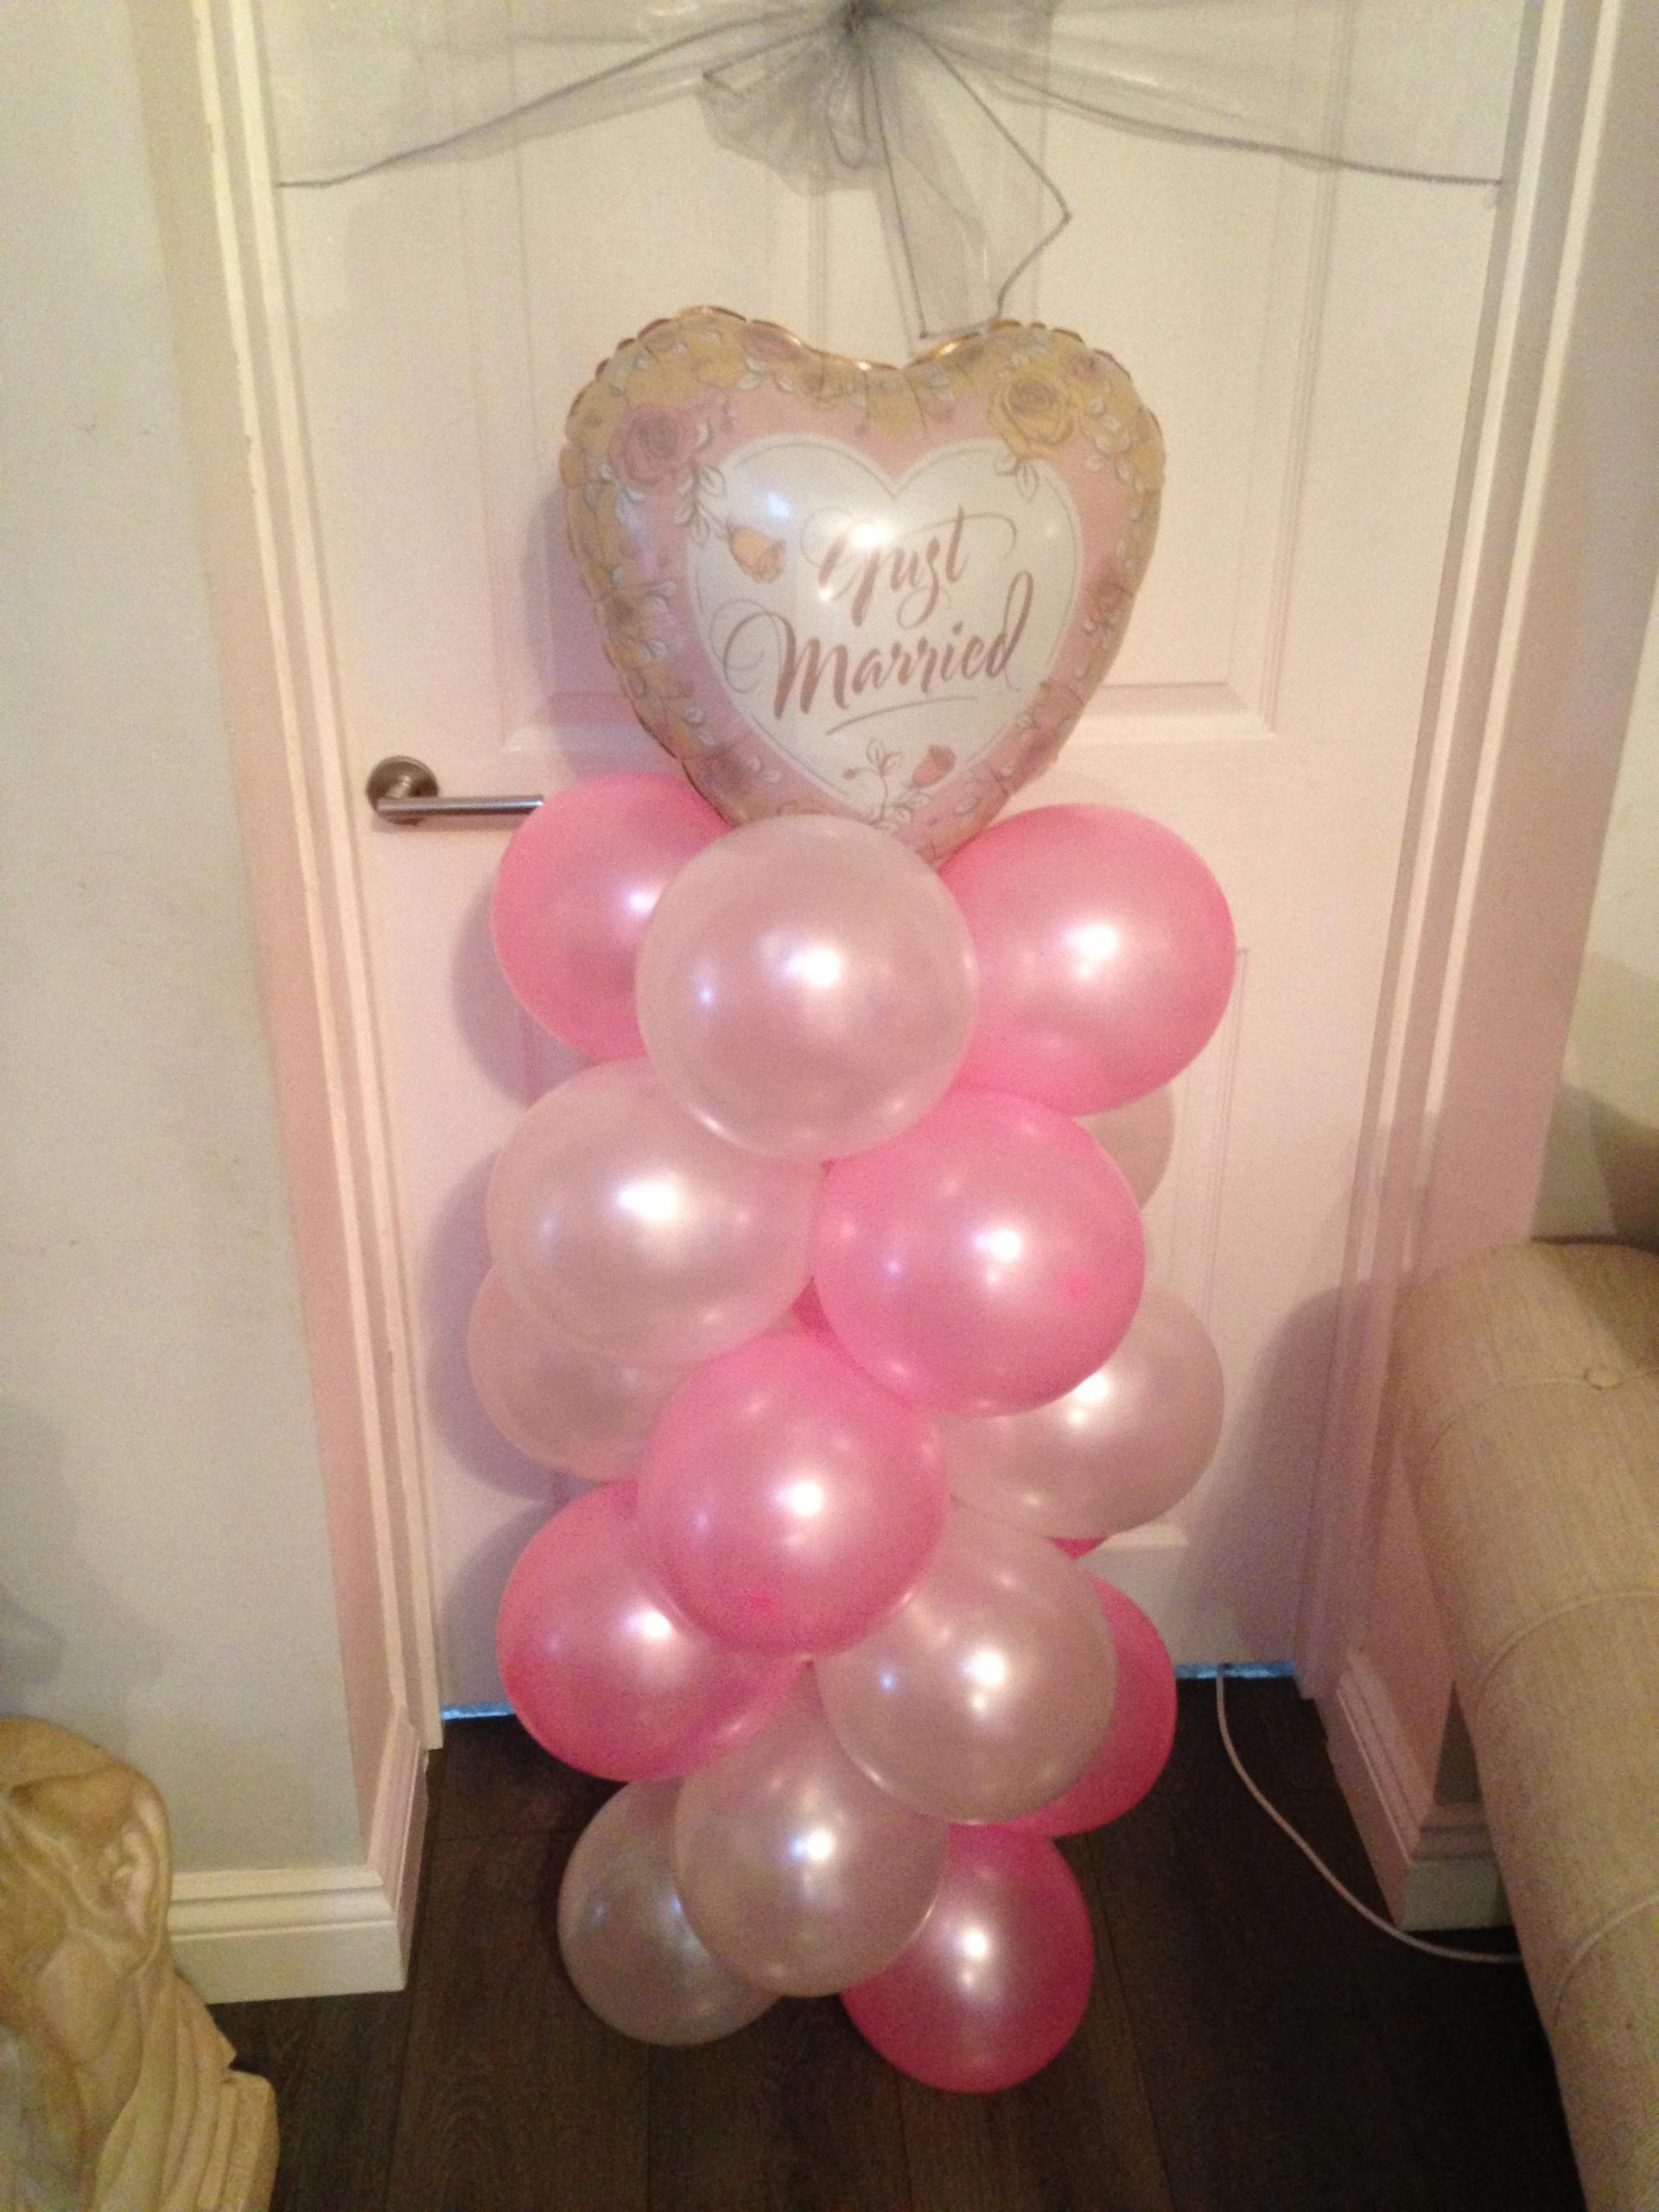 Just married balloons